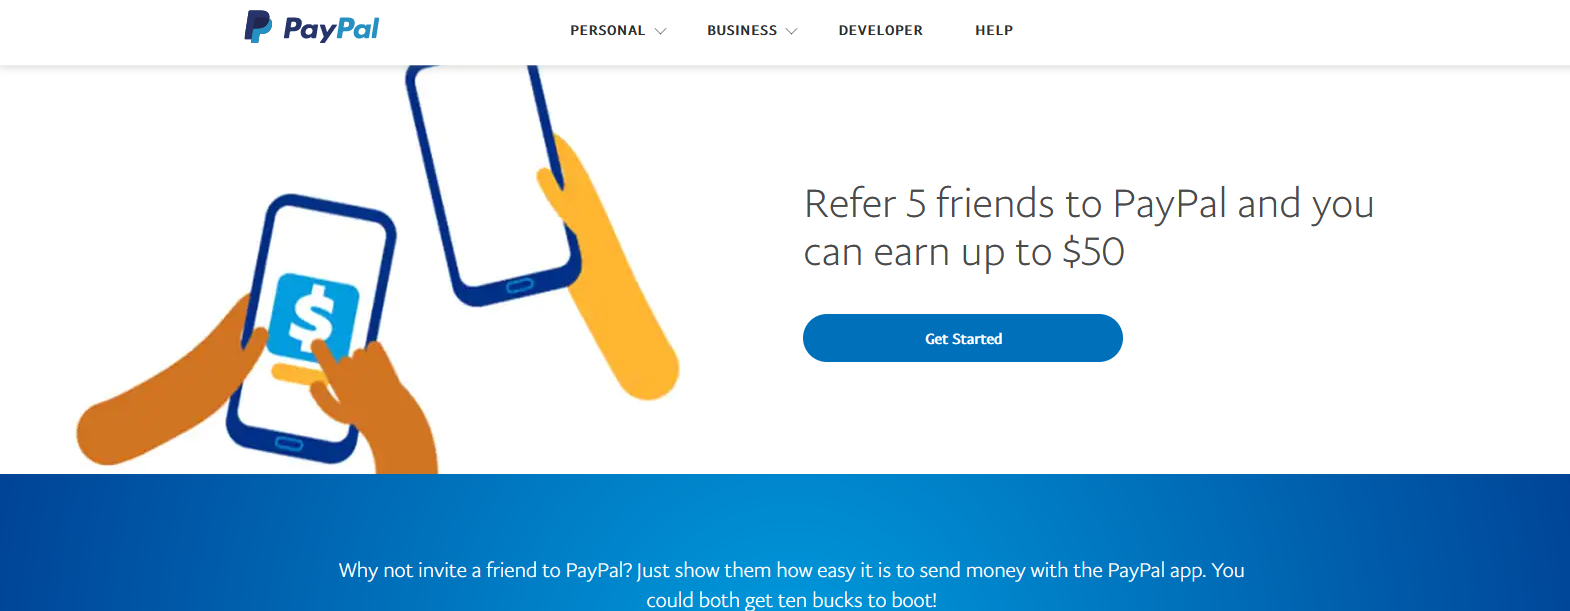 paypal send money to friend with credit card